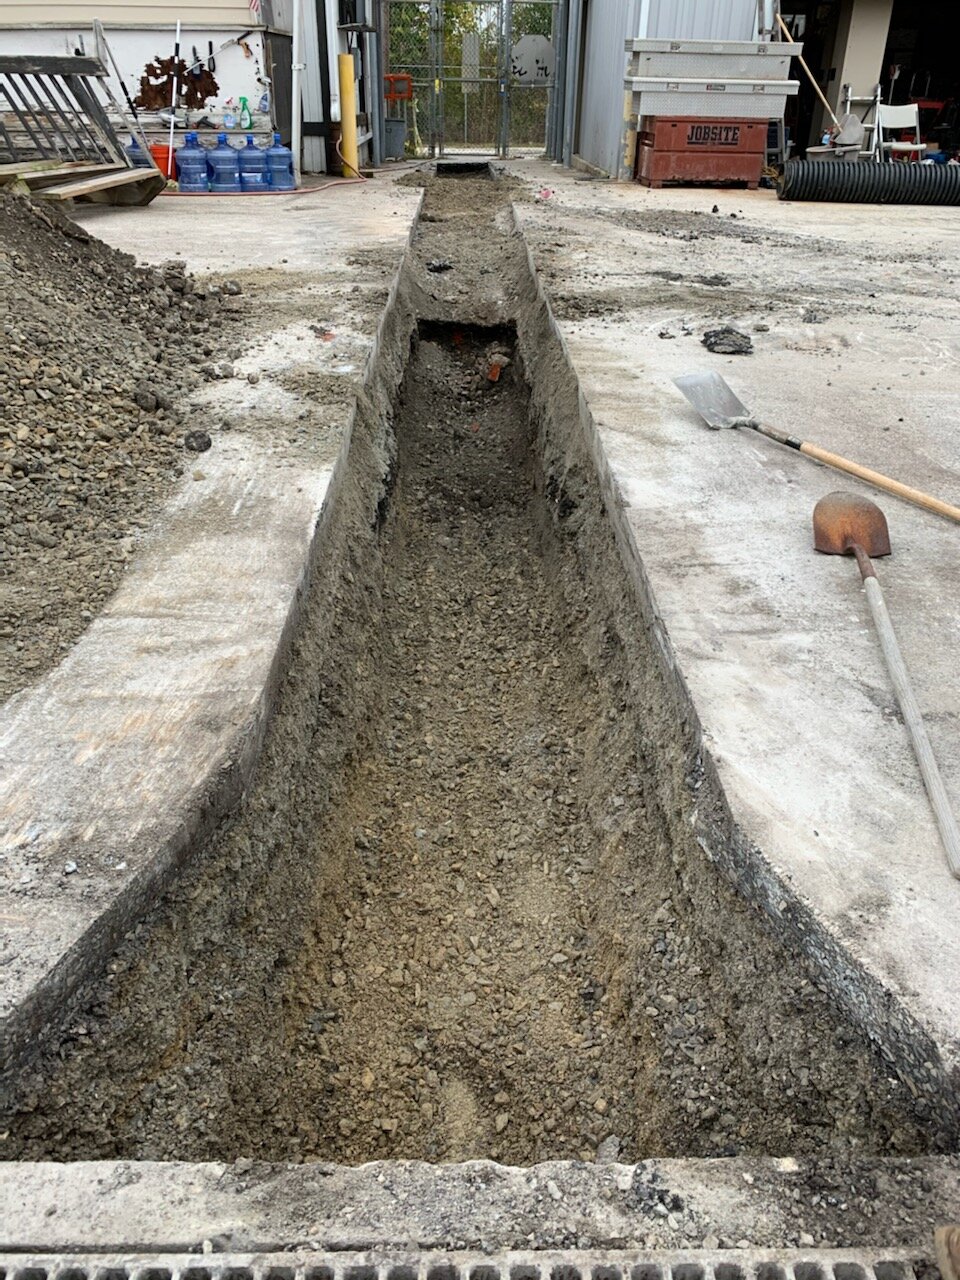  Phila. Impound Lot - Storm Sewer Trench 